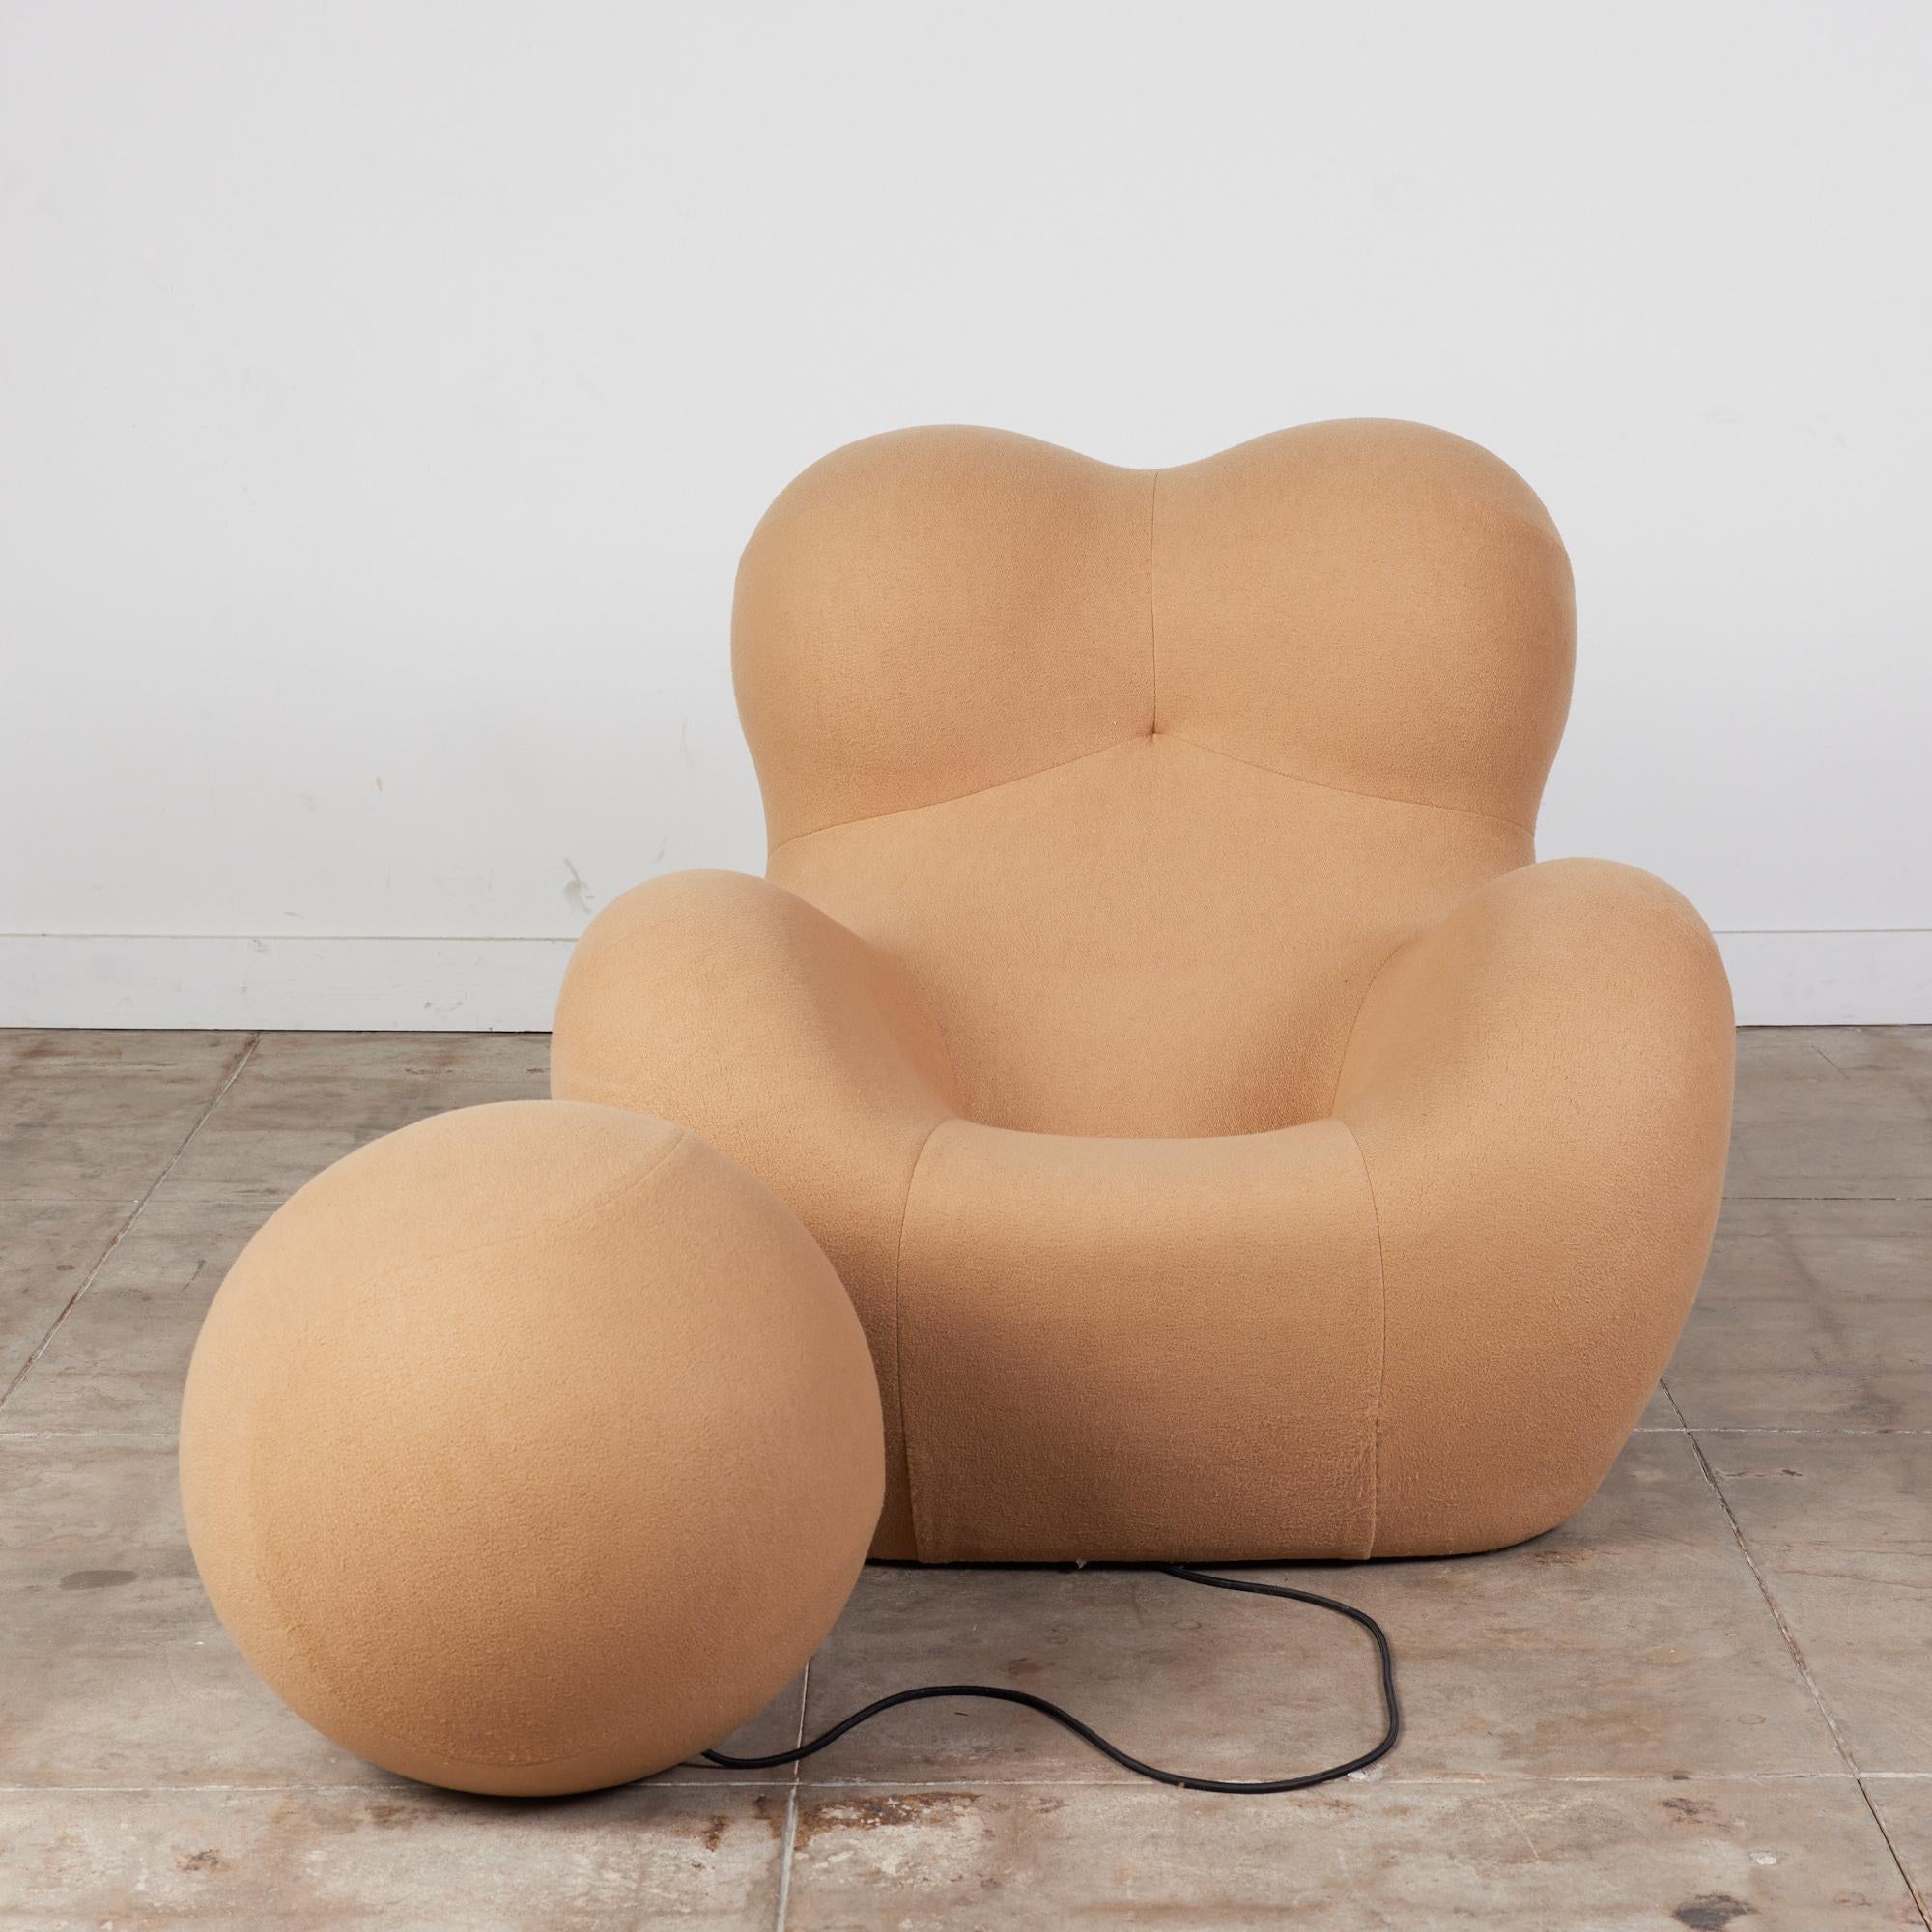 La Mamma Up 5 camel lounge chair by Gaetano Pesce for B&B Italia, c.2000s, Italy. The curvaceous shape, was inspired by the silhouette of ancient fertility goddesses. It's name the 